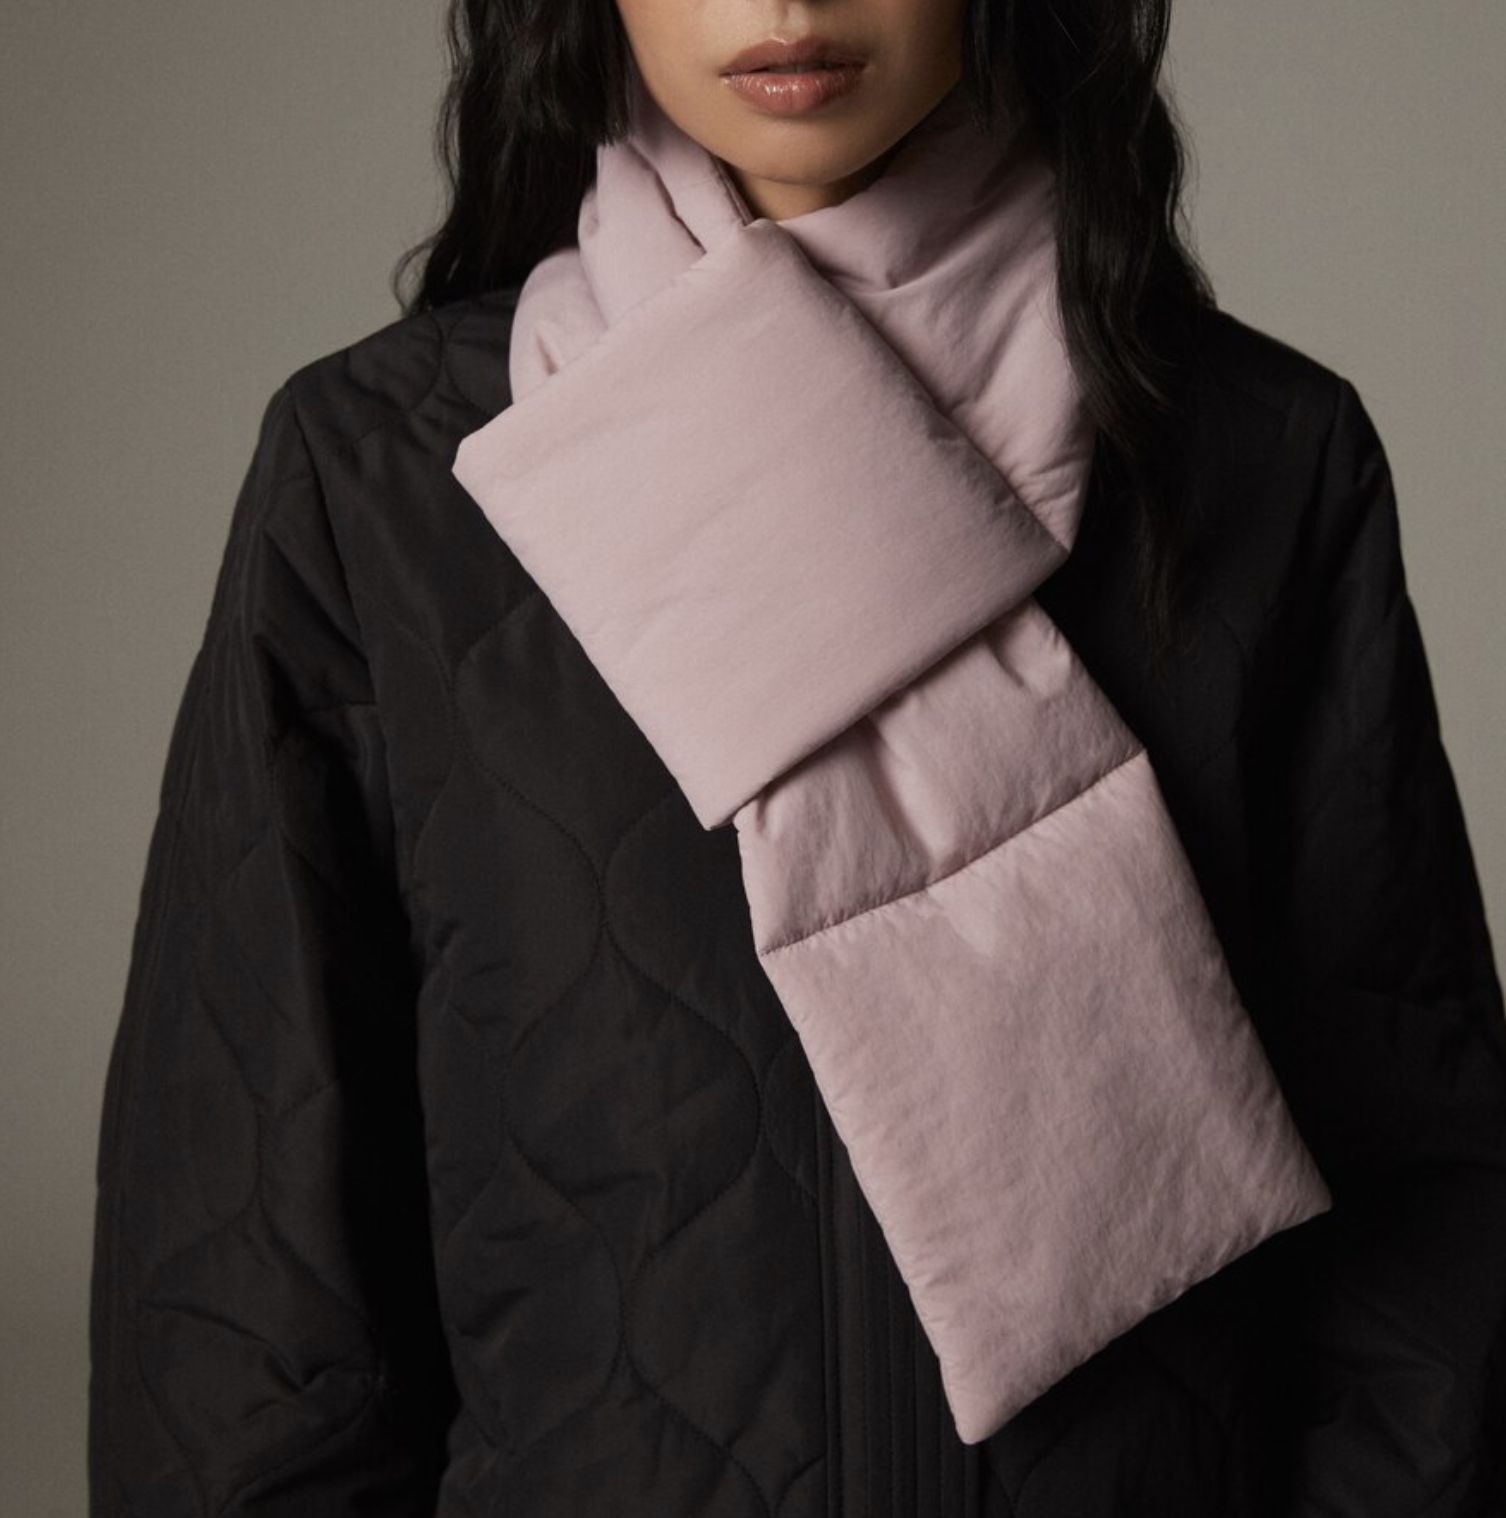 A person wearing the scarf with a puffer jacket